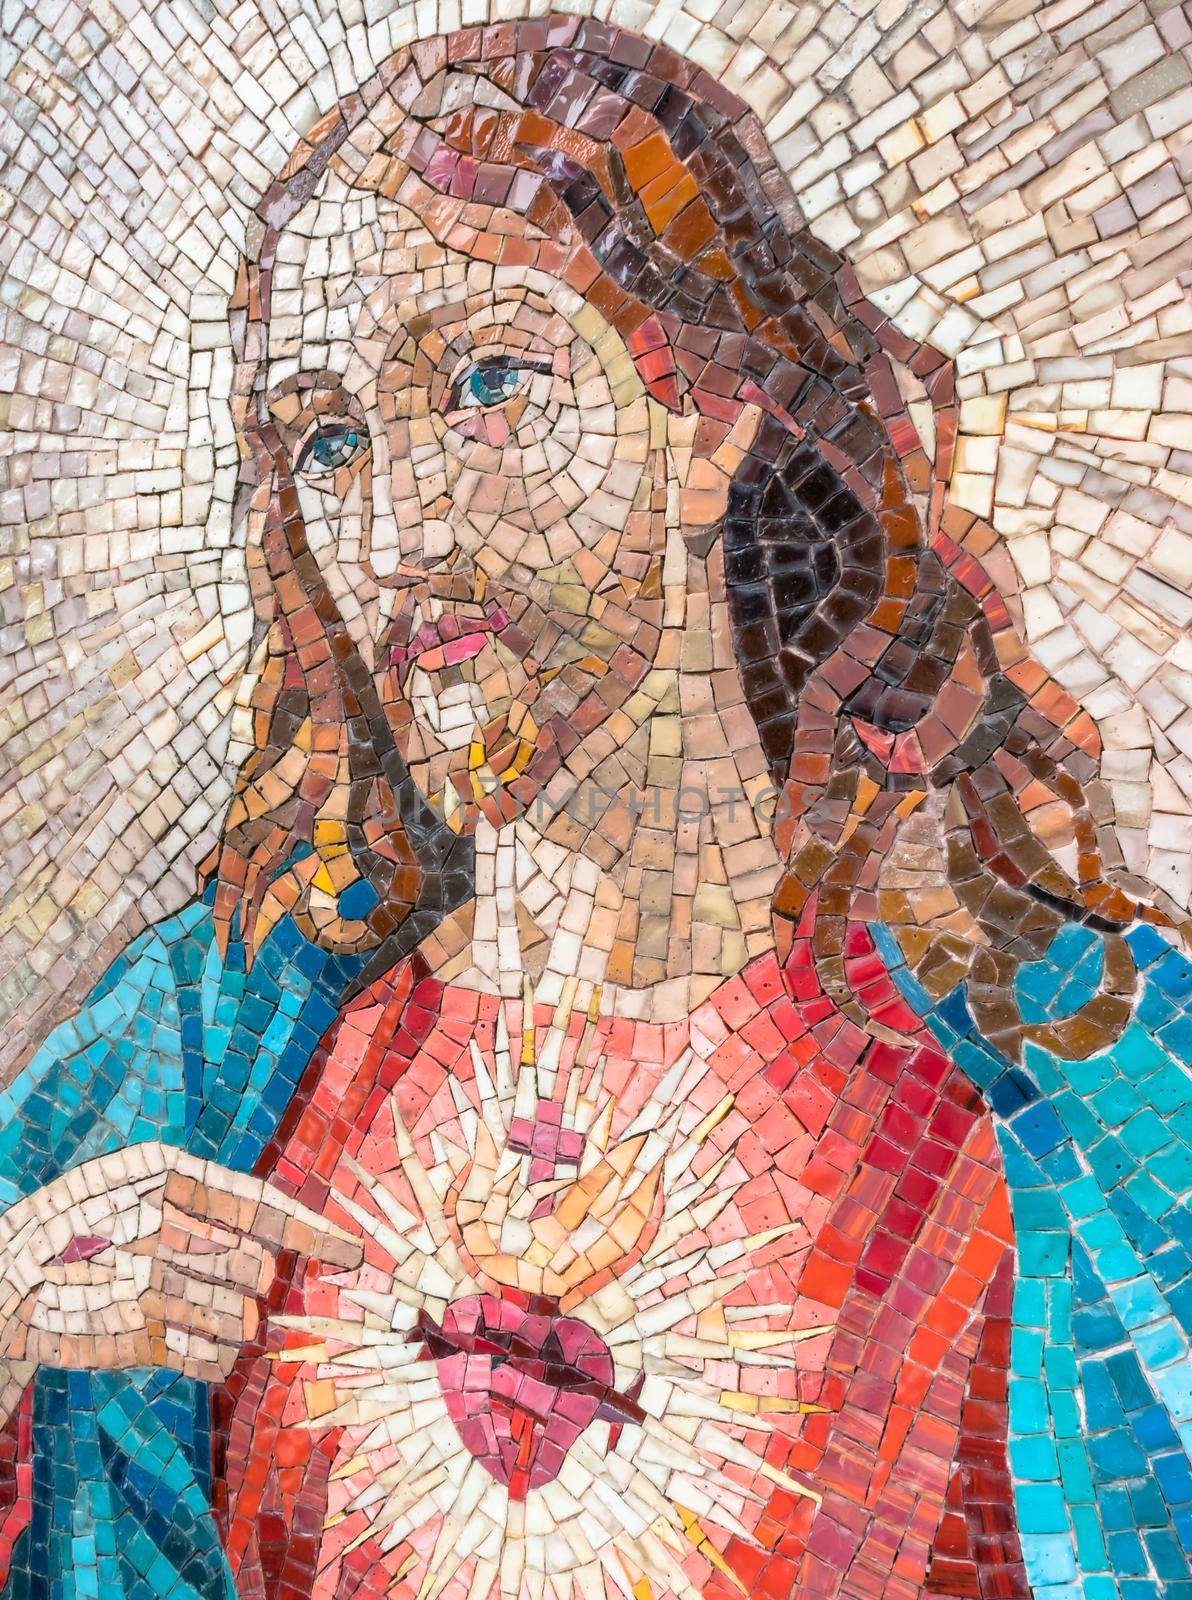 Mosaic portrait of Jesus Christ. Jesus in a recent mosaic made with ancient techniques.